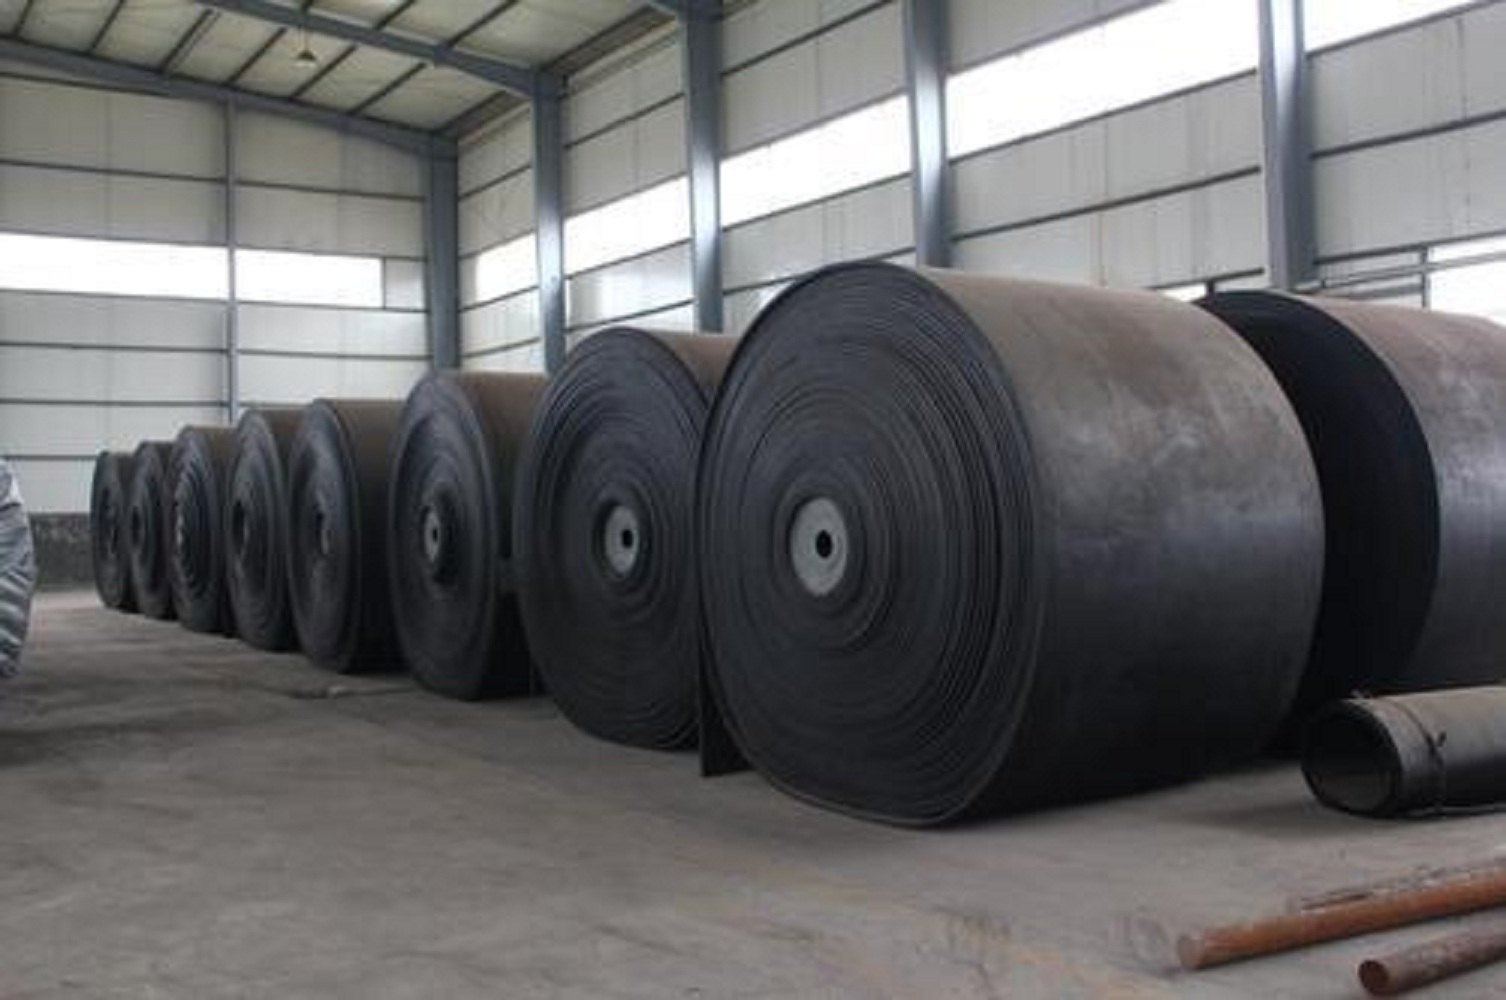 What type of rubber belt is used in conveyor belts?